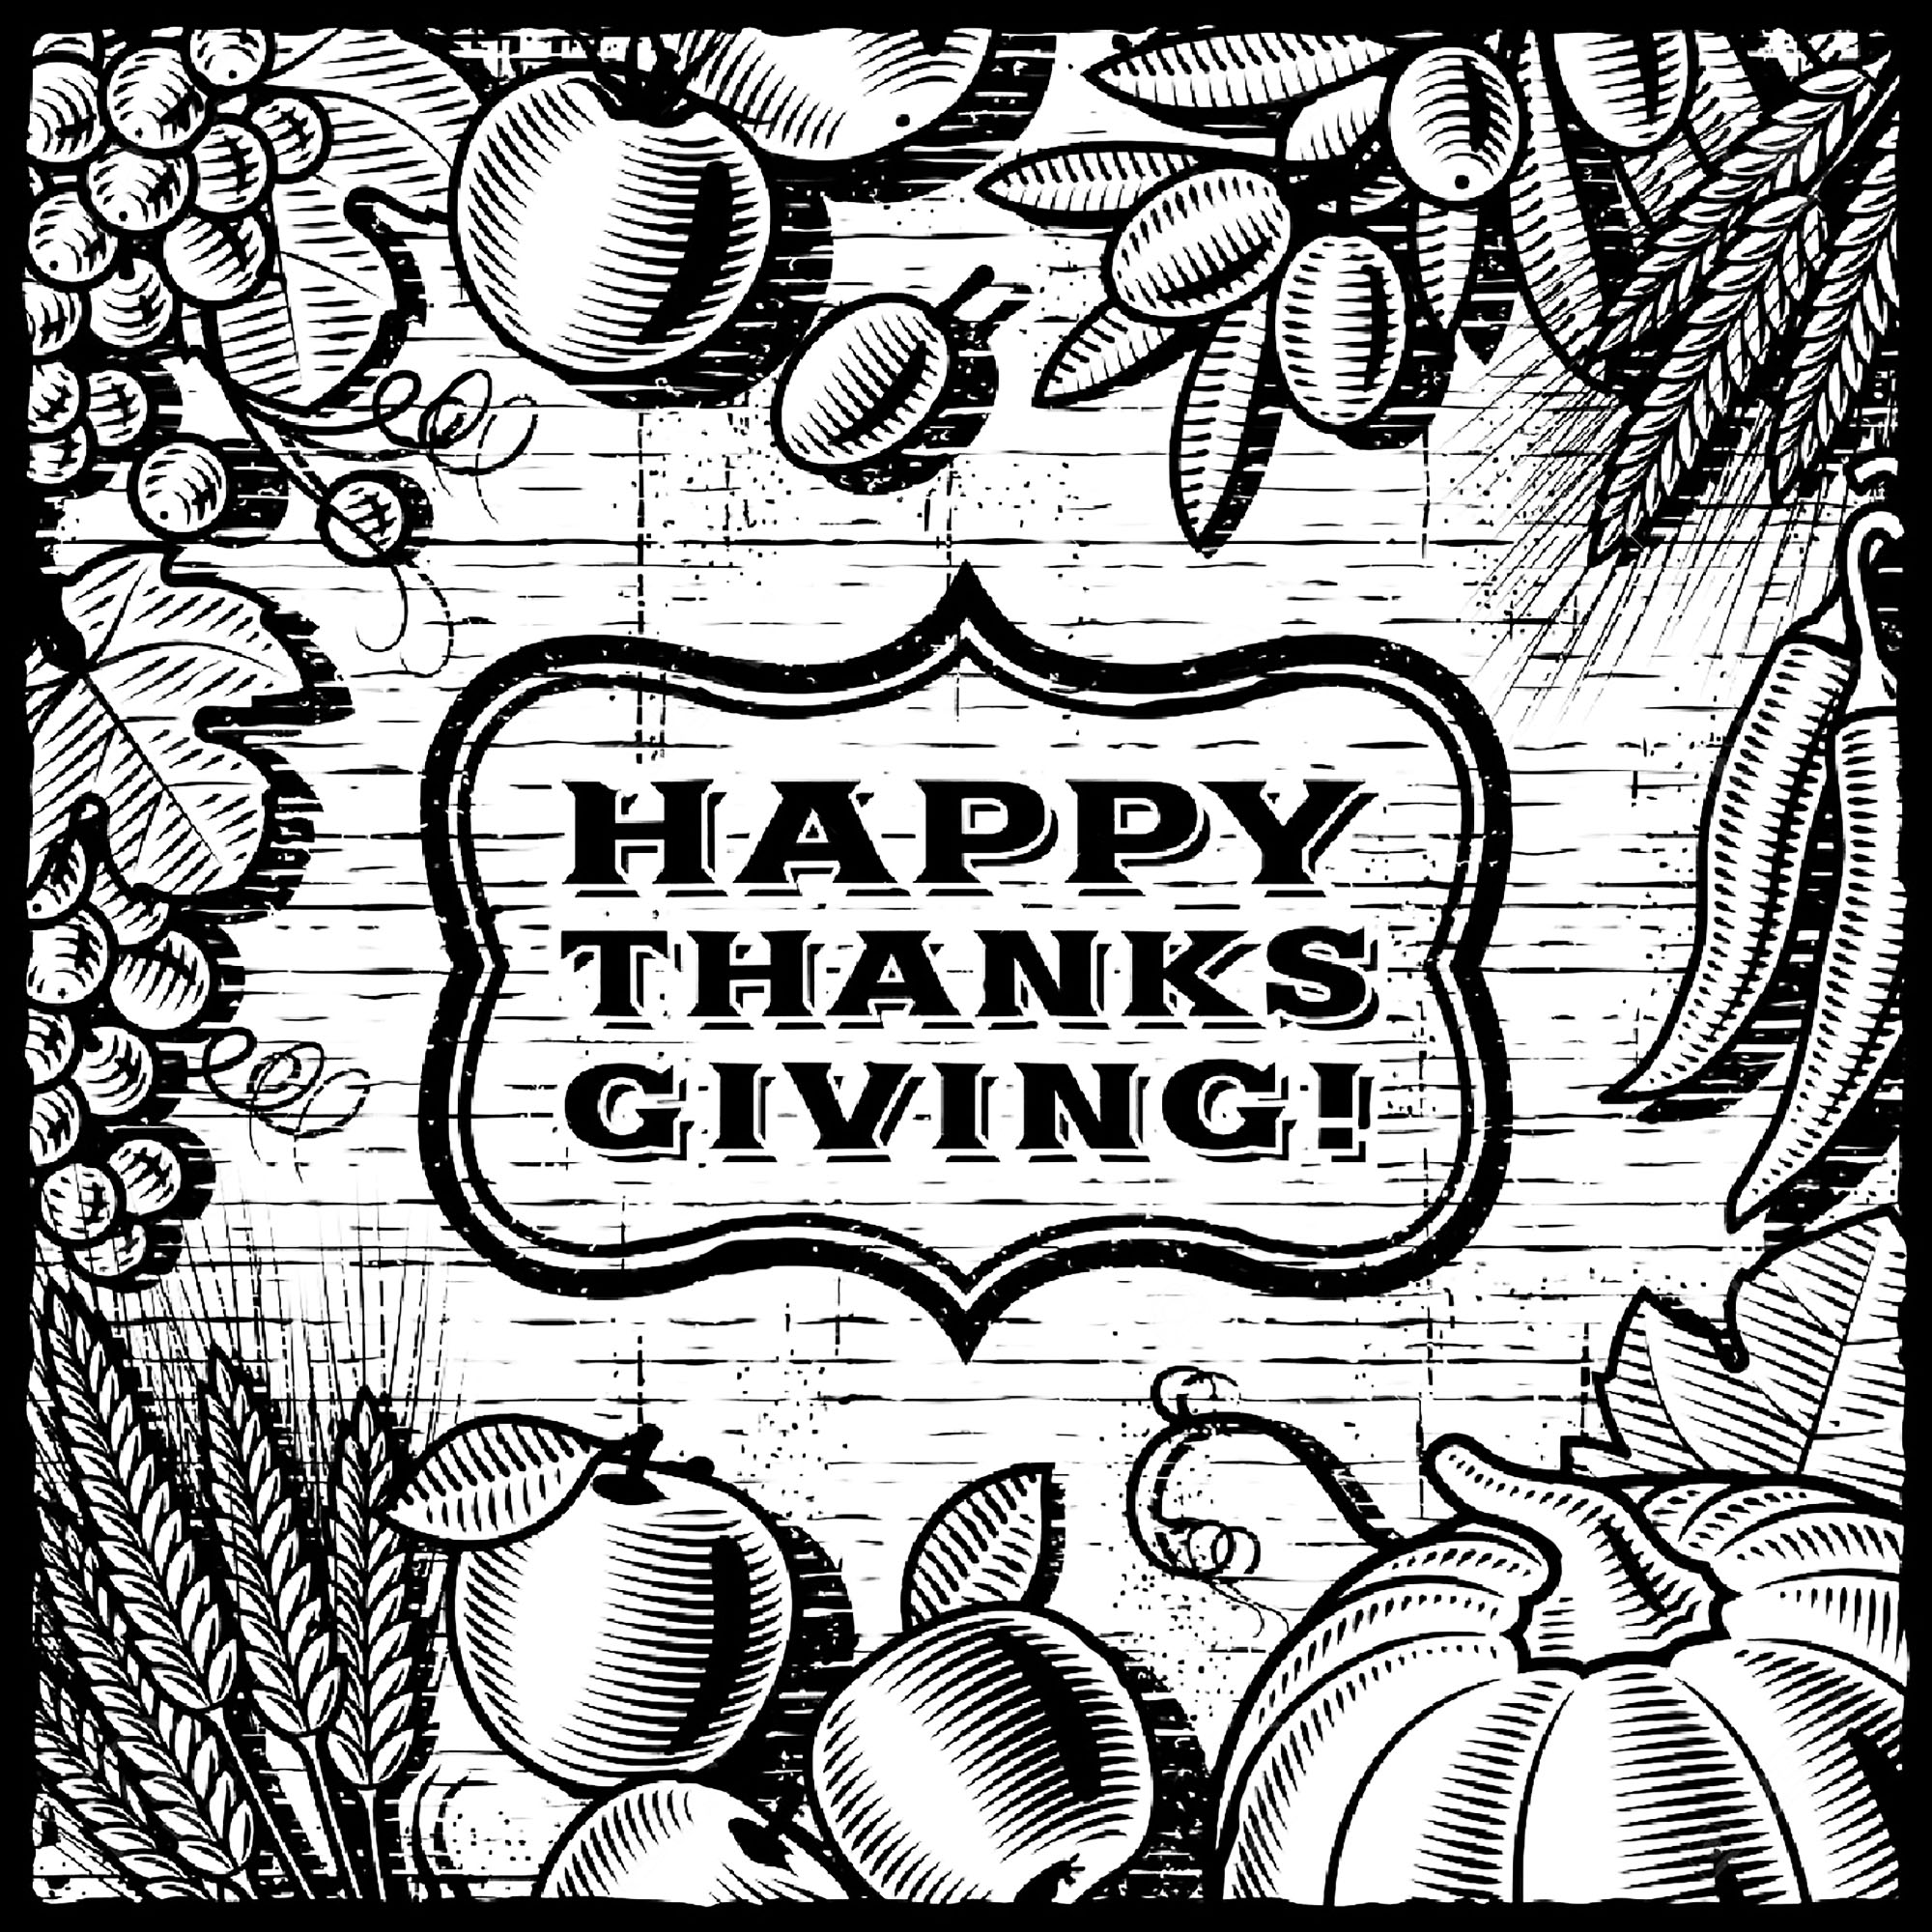 Beautiful & complex coloring page celebrating Thanksgiving Day